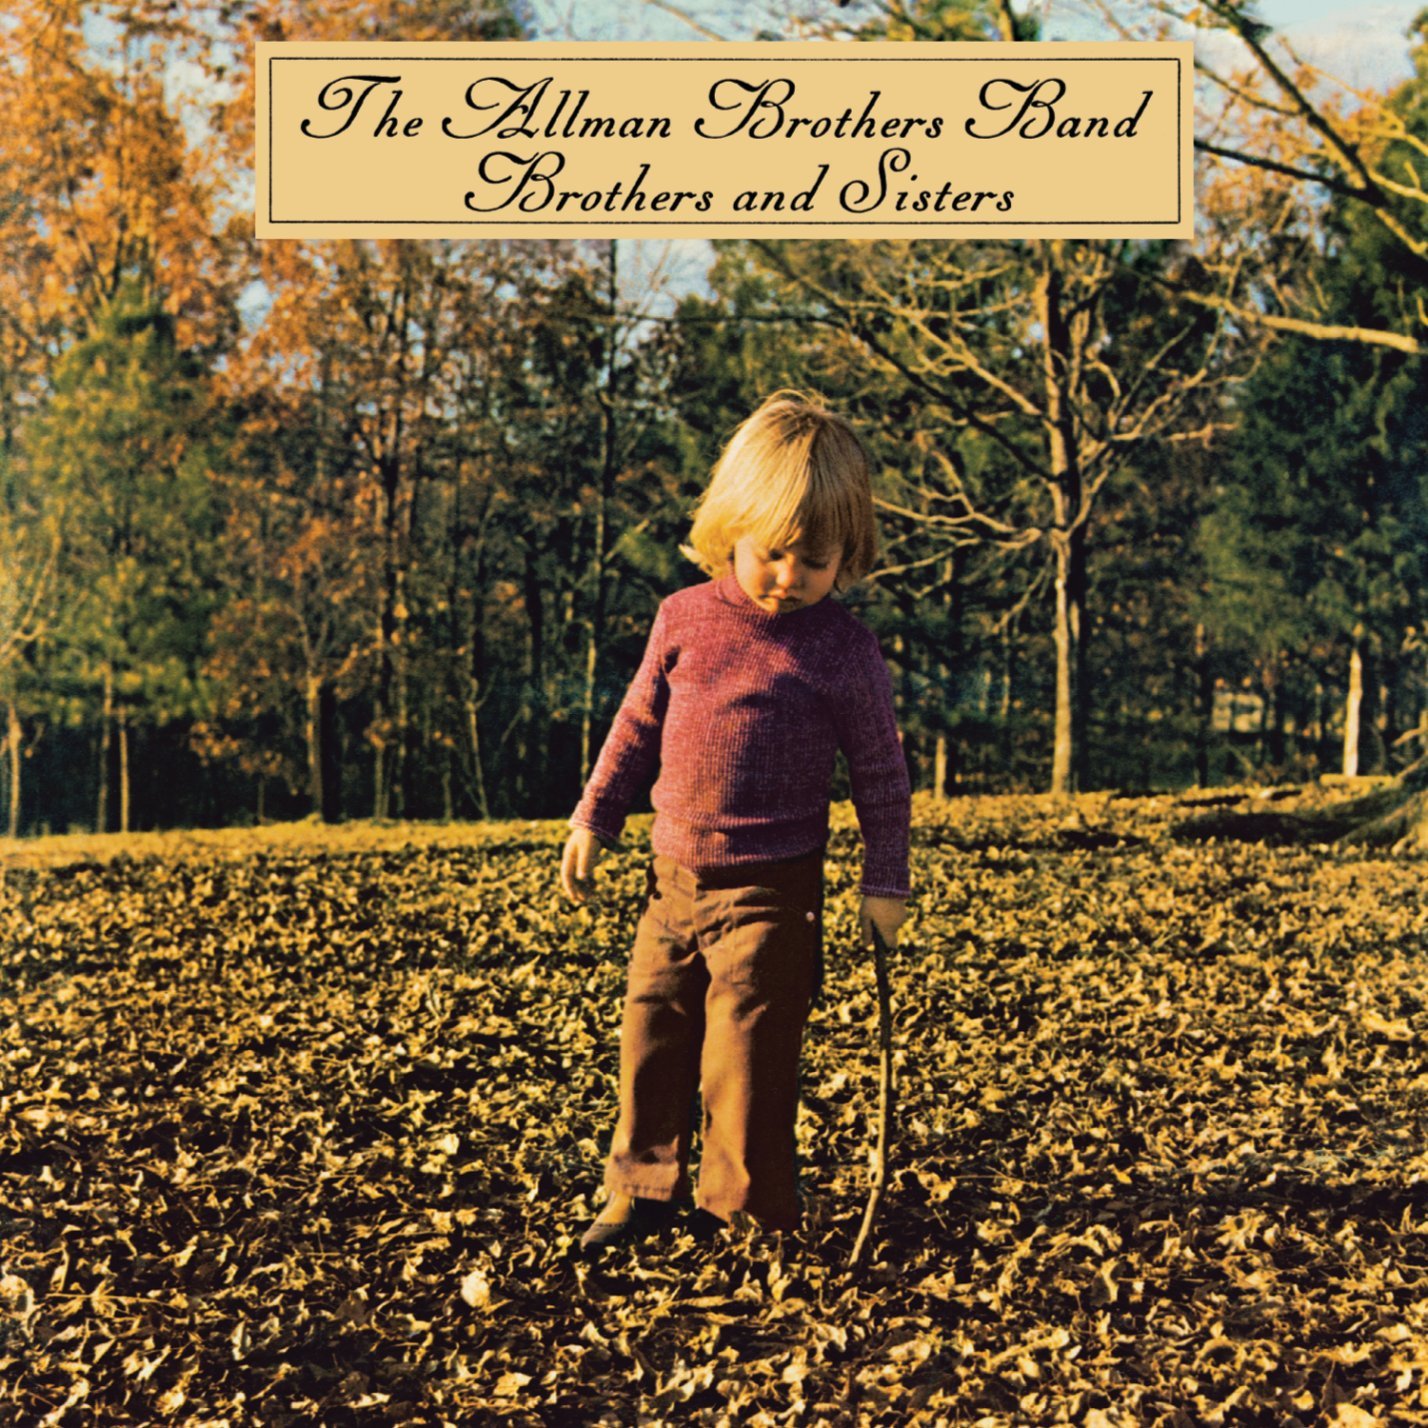 Brothers & Sisters / The allman brothers bandのジャケット